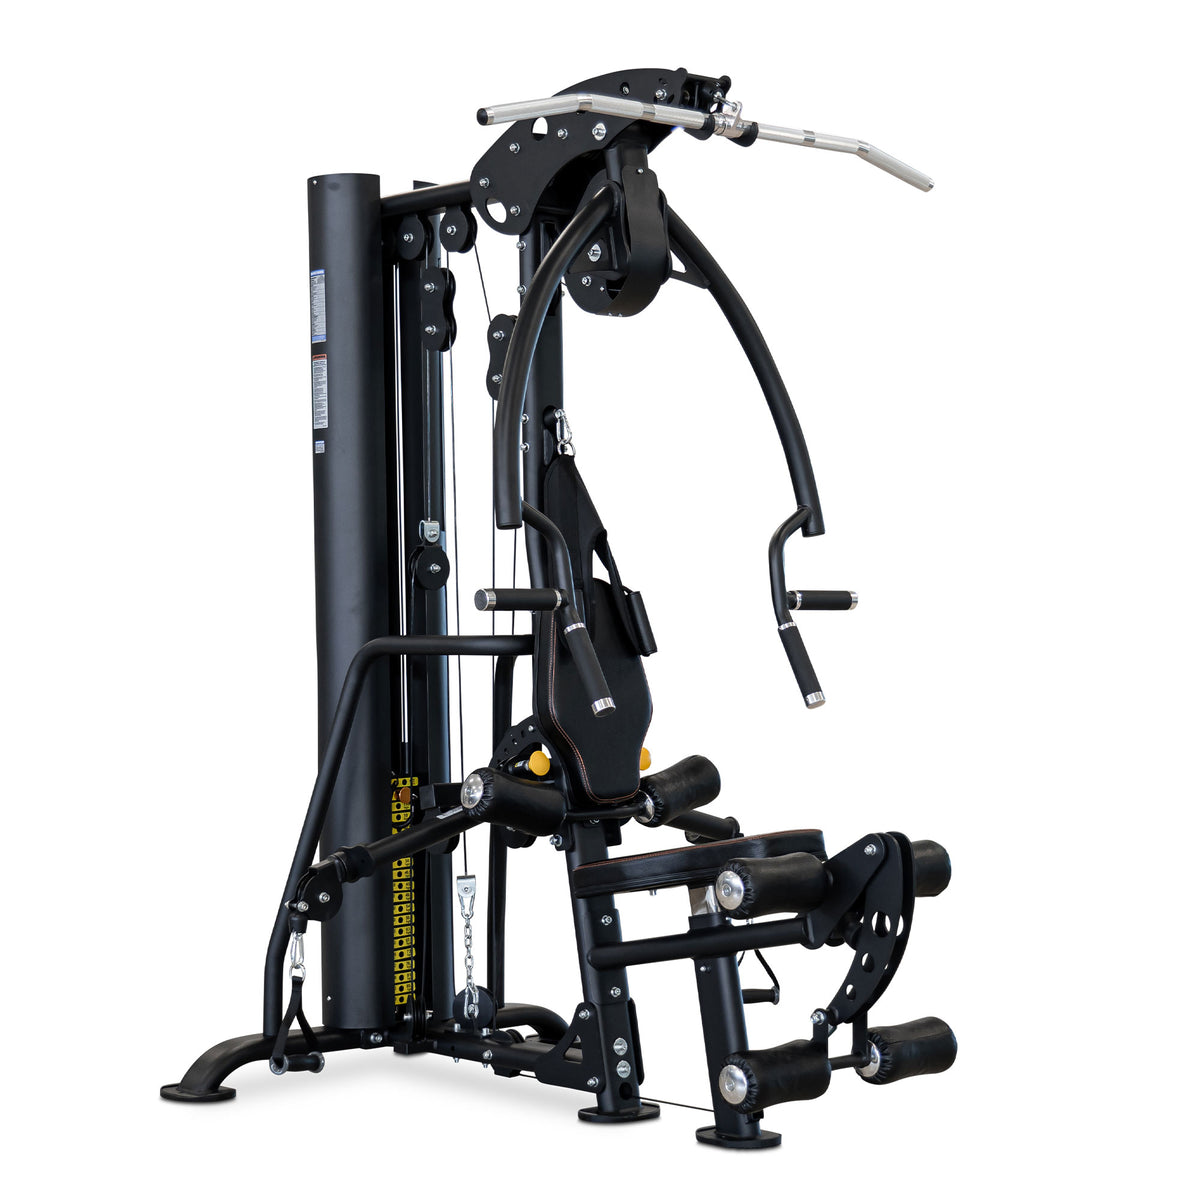 Reeplex Commercial Multi Gym With 90kg Steel Weight Stack